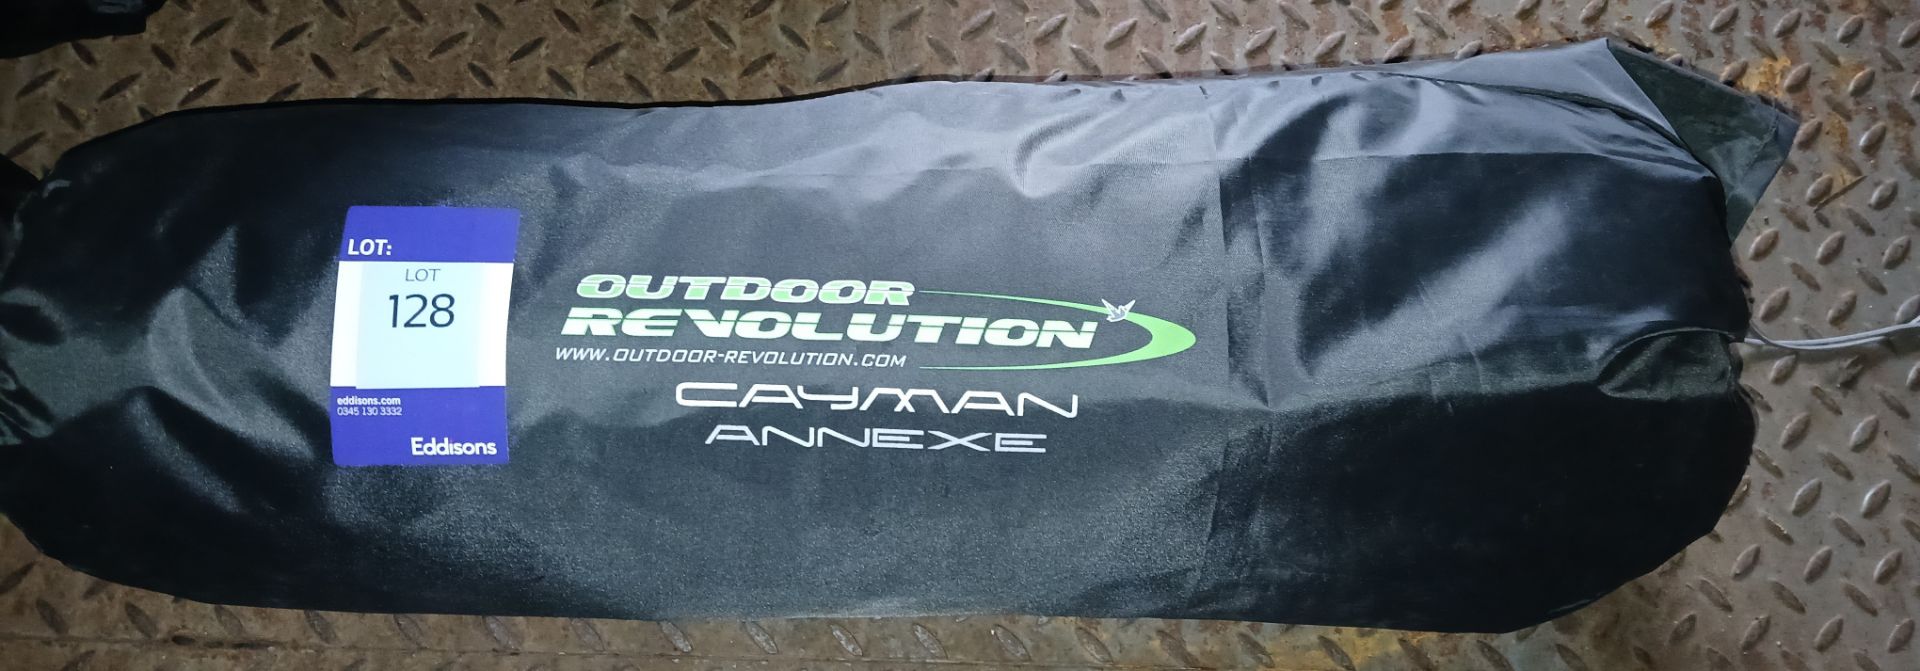 Outdoor Revolution Cayman Annexe (Please note, Viewing Strongly Recommended - Eddisons have not